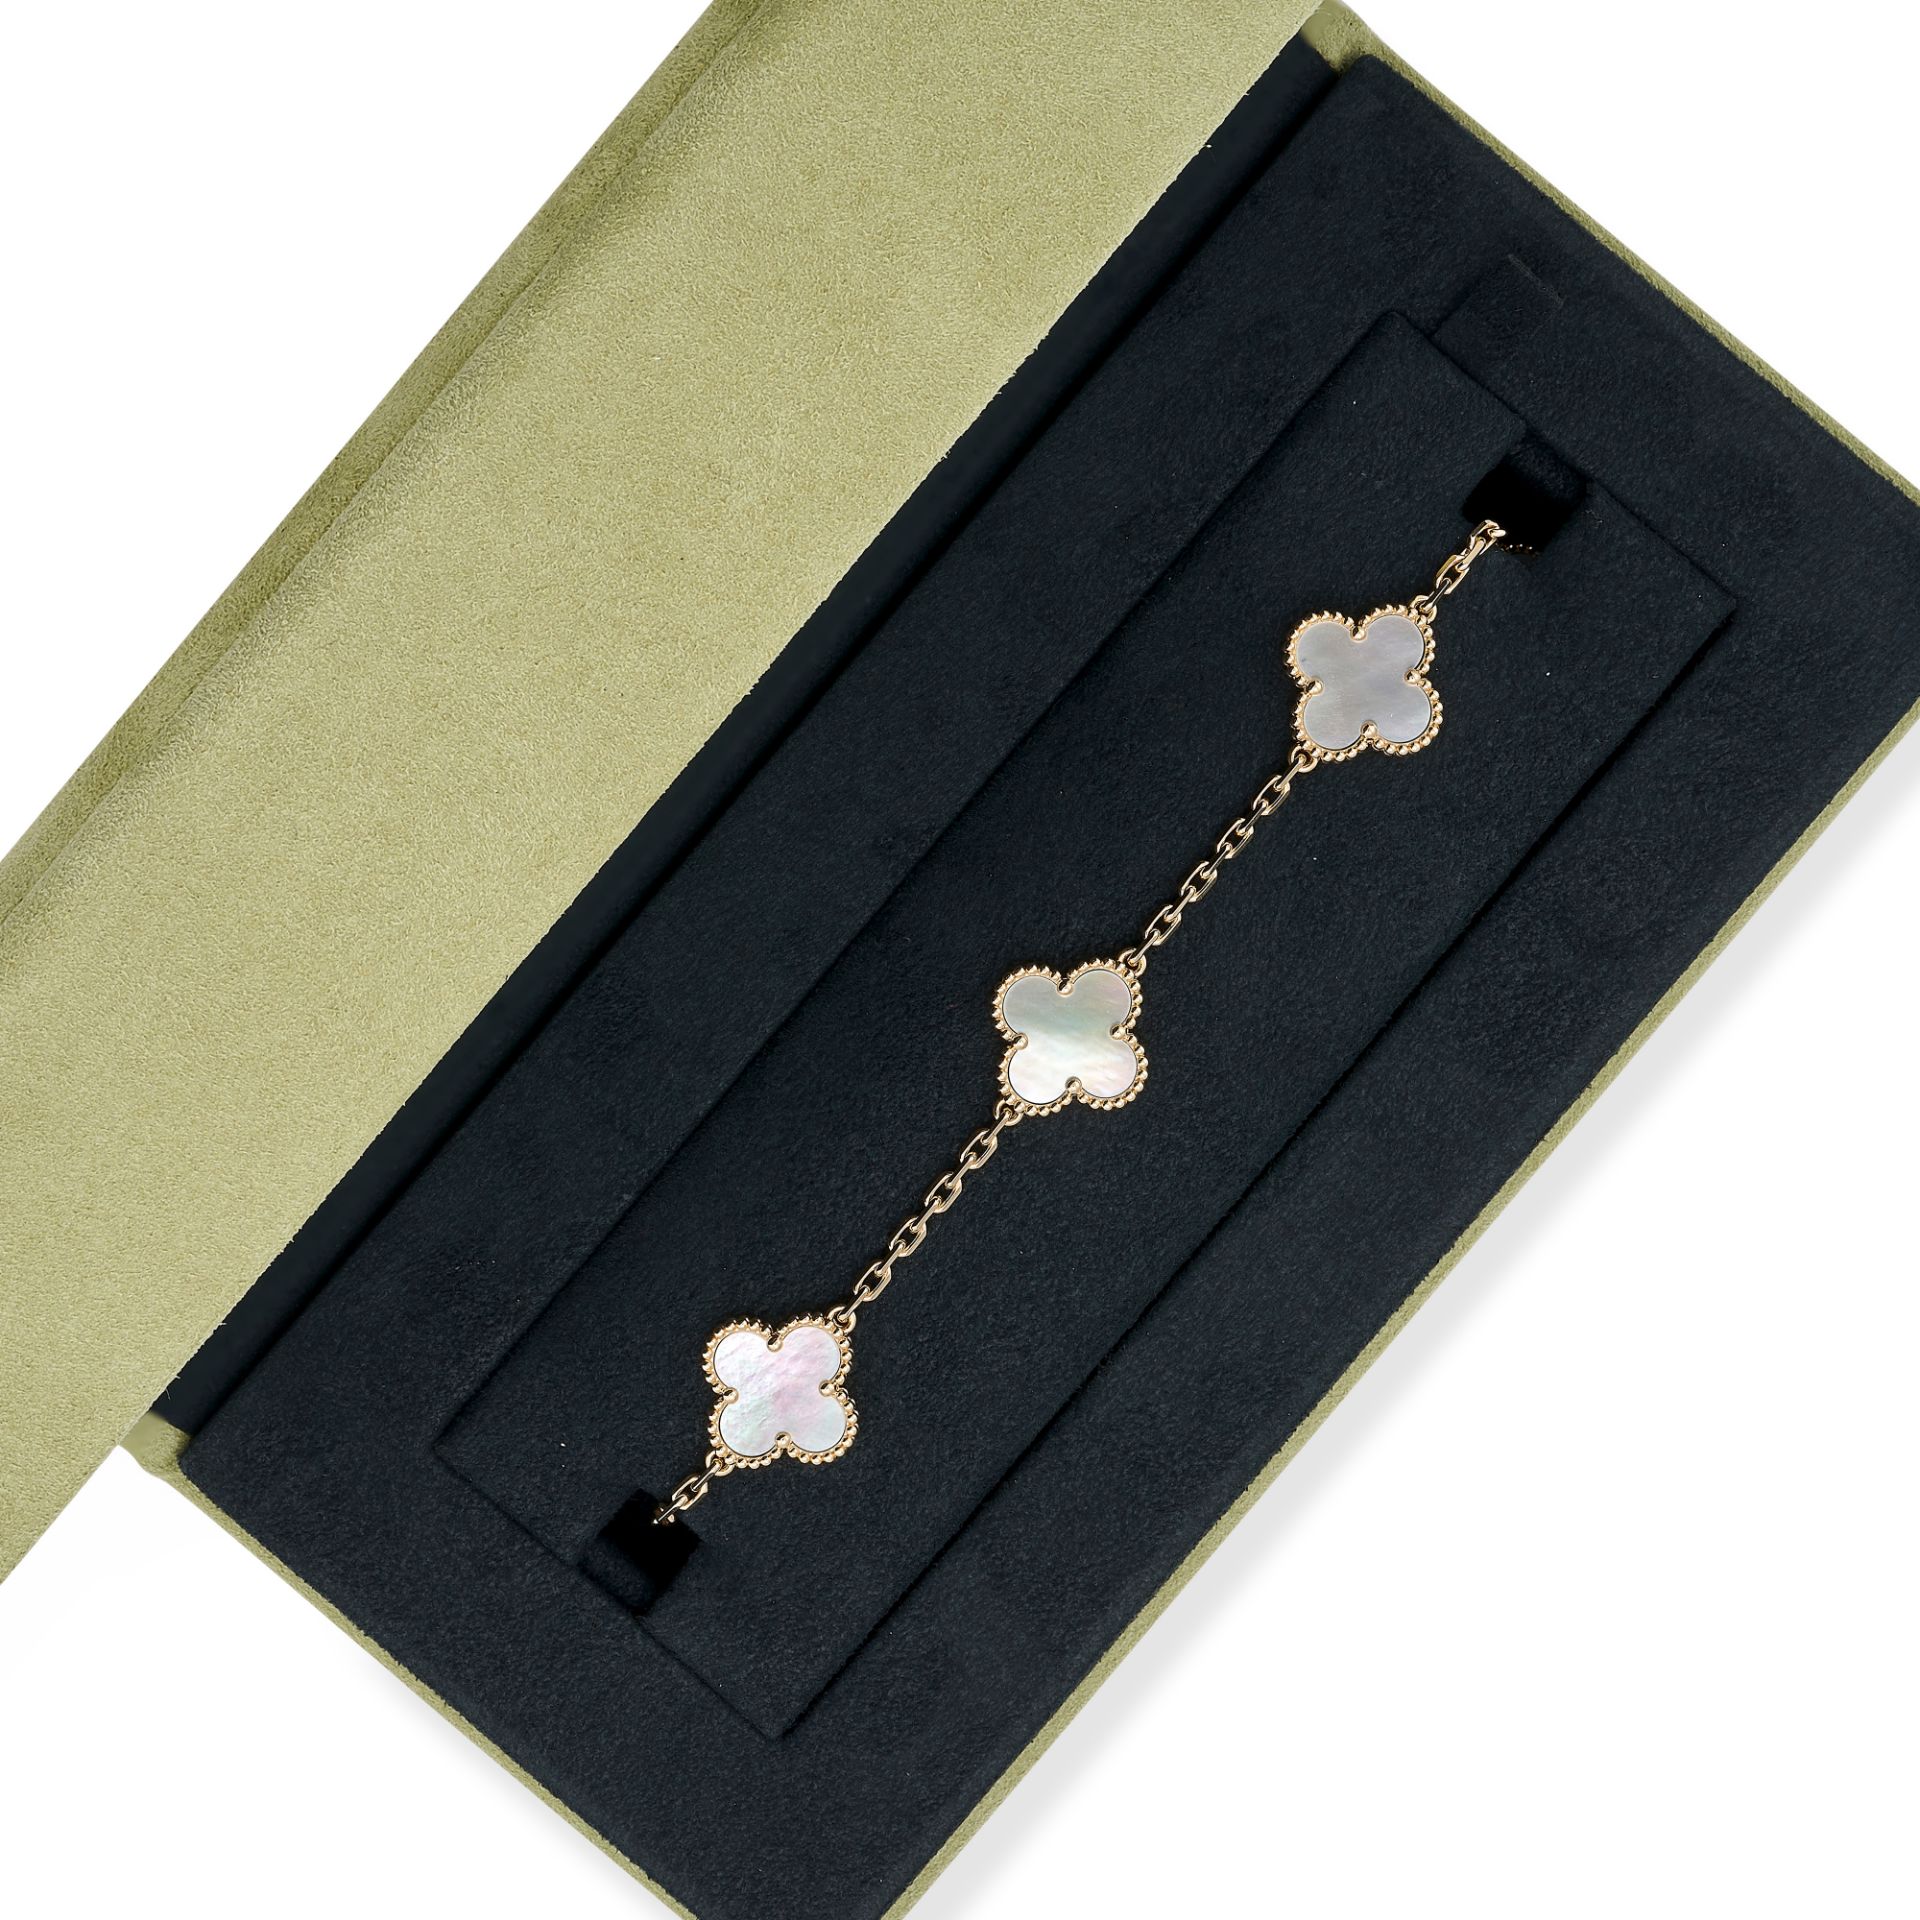 VAN CLEEF & ARPELS, A MOTHER OF PEARL ALHAMBRA BRACELET in 18ct yellow gold, comprising five - Image 3 of 4